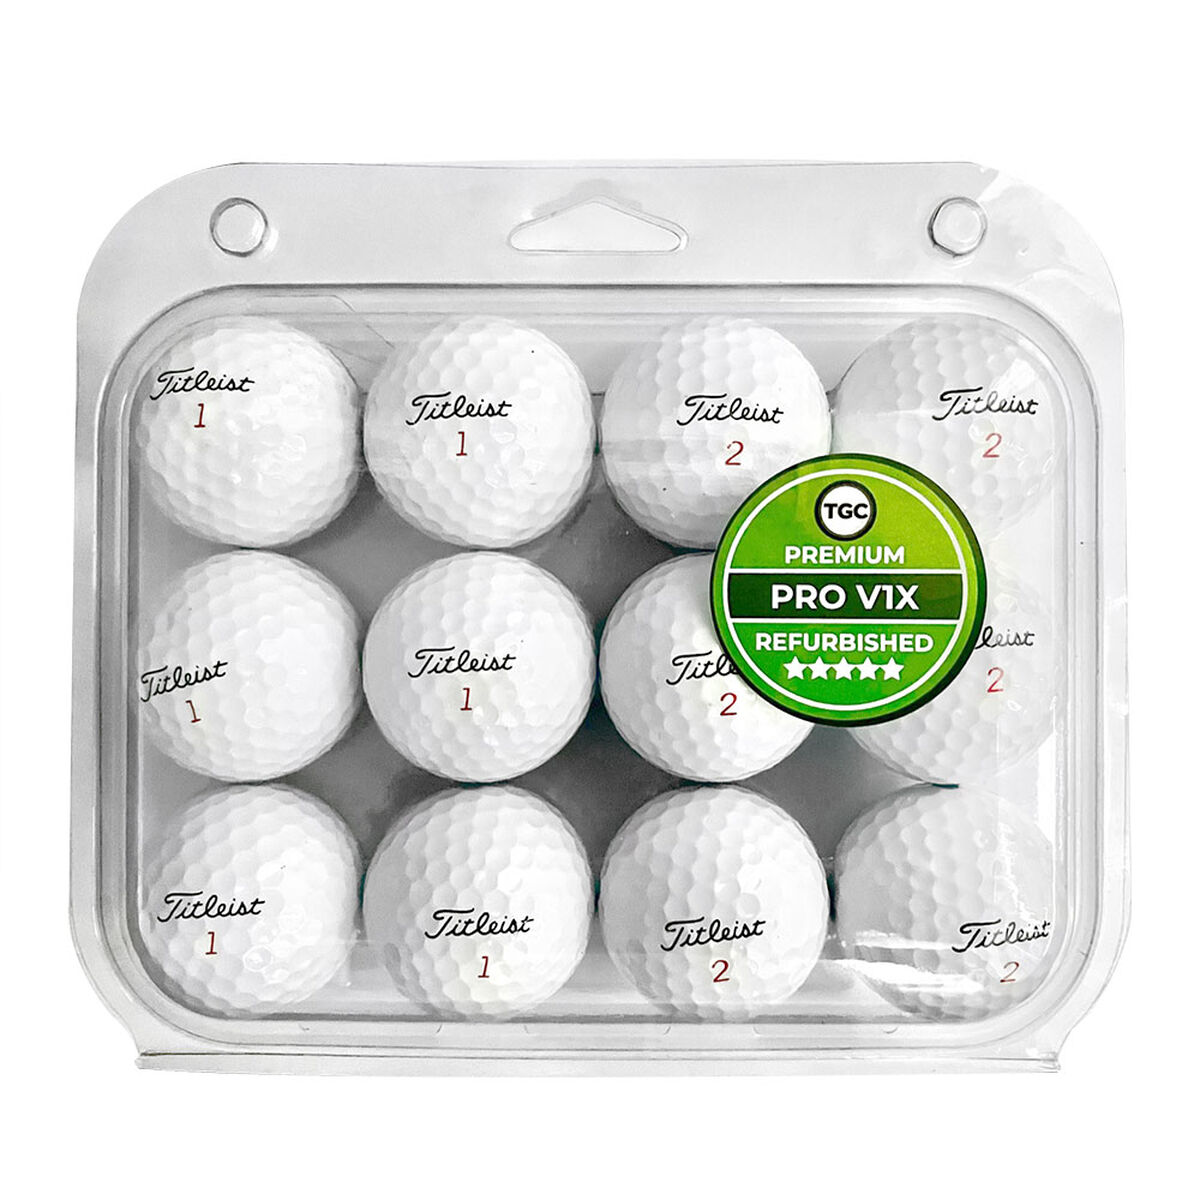 The Golf Company Mens White The Refurbished Pro V1x 12 Ball Pack | American Golf, One Size von The Golf Company